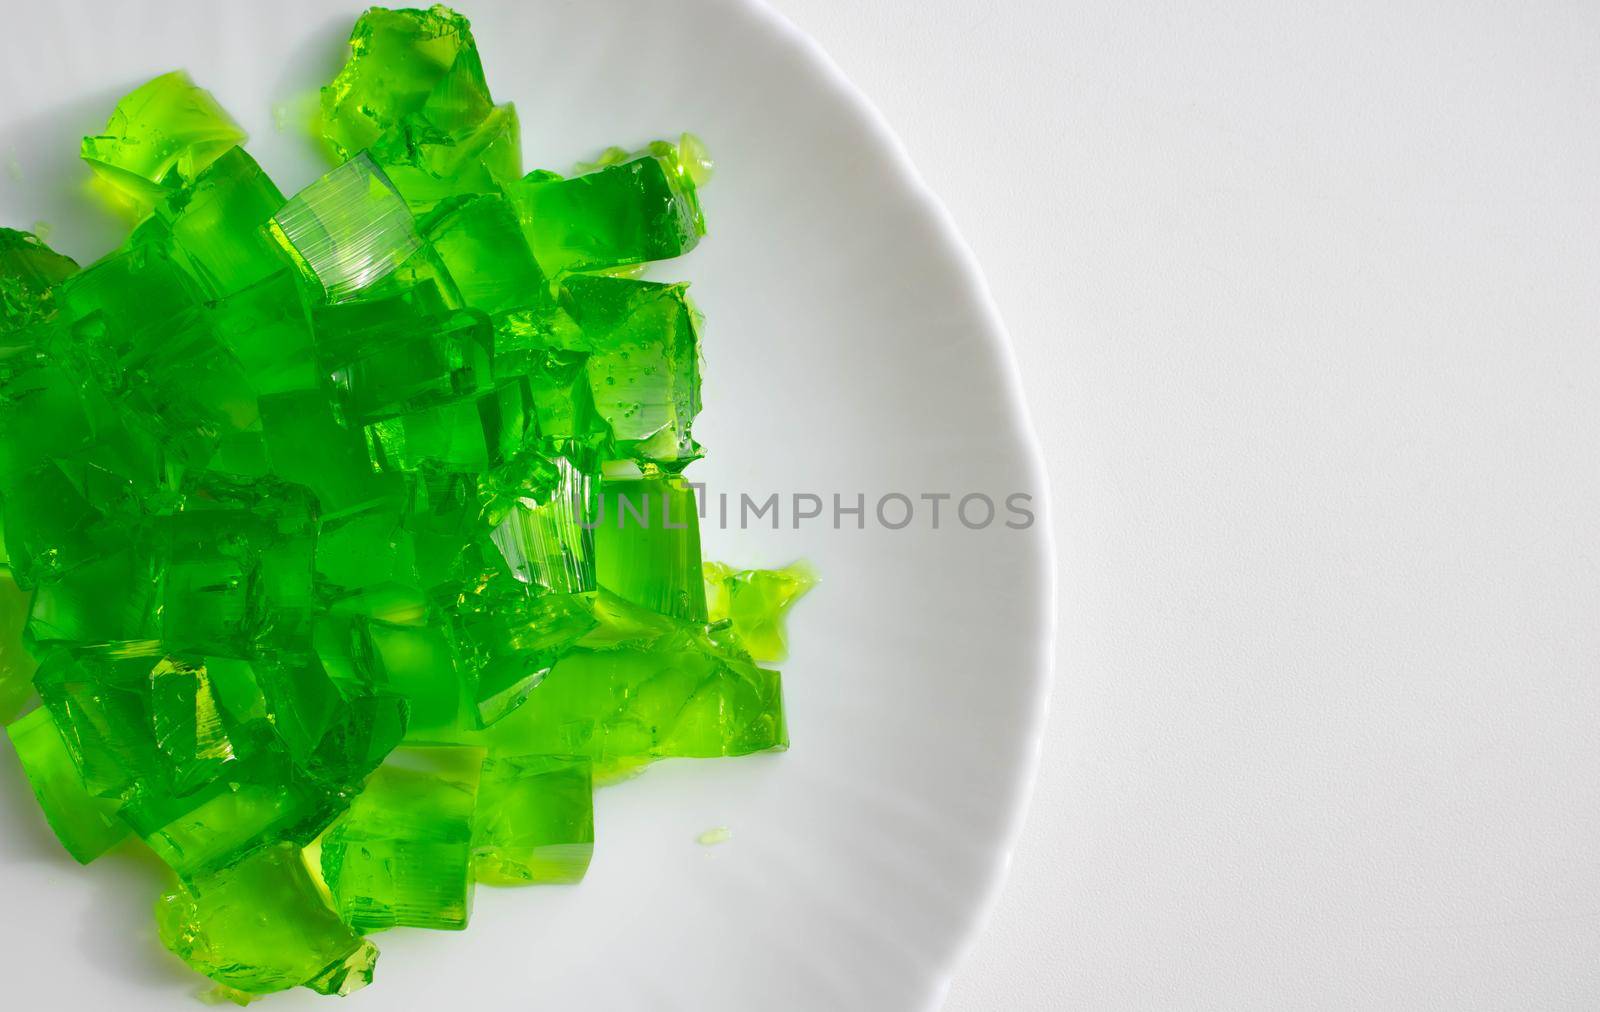 Delicious green jelly cube on white background by lapushka62